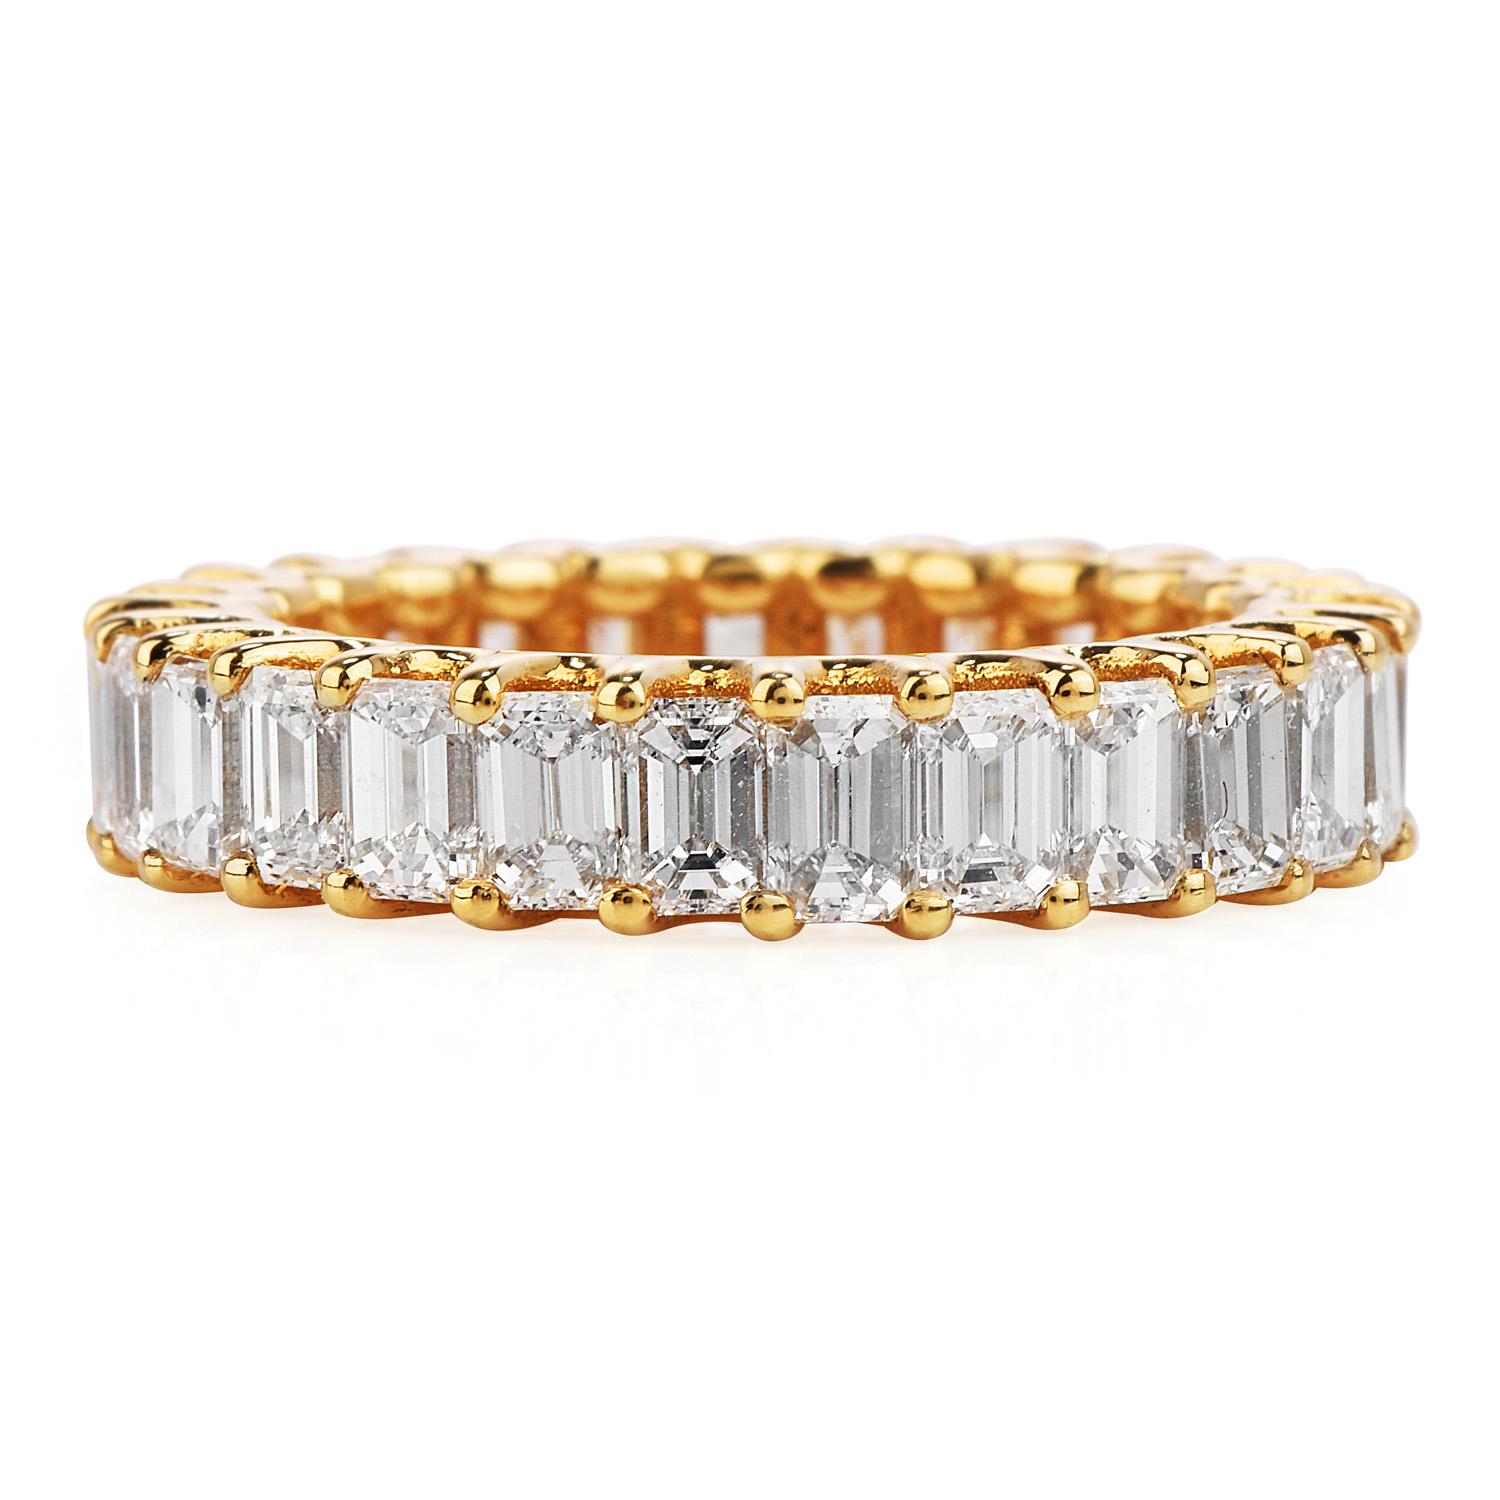 Women's or Men's 3.82 Carat Baguette Cut Diamond Yellow Gold Eternity Band Ring For Sale